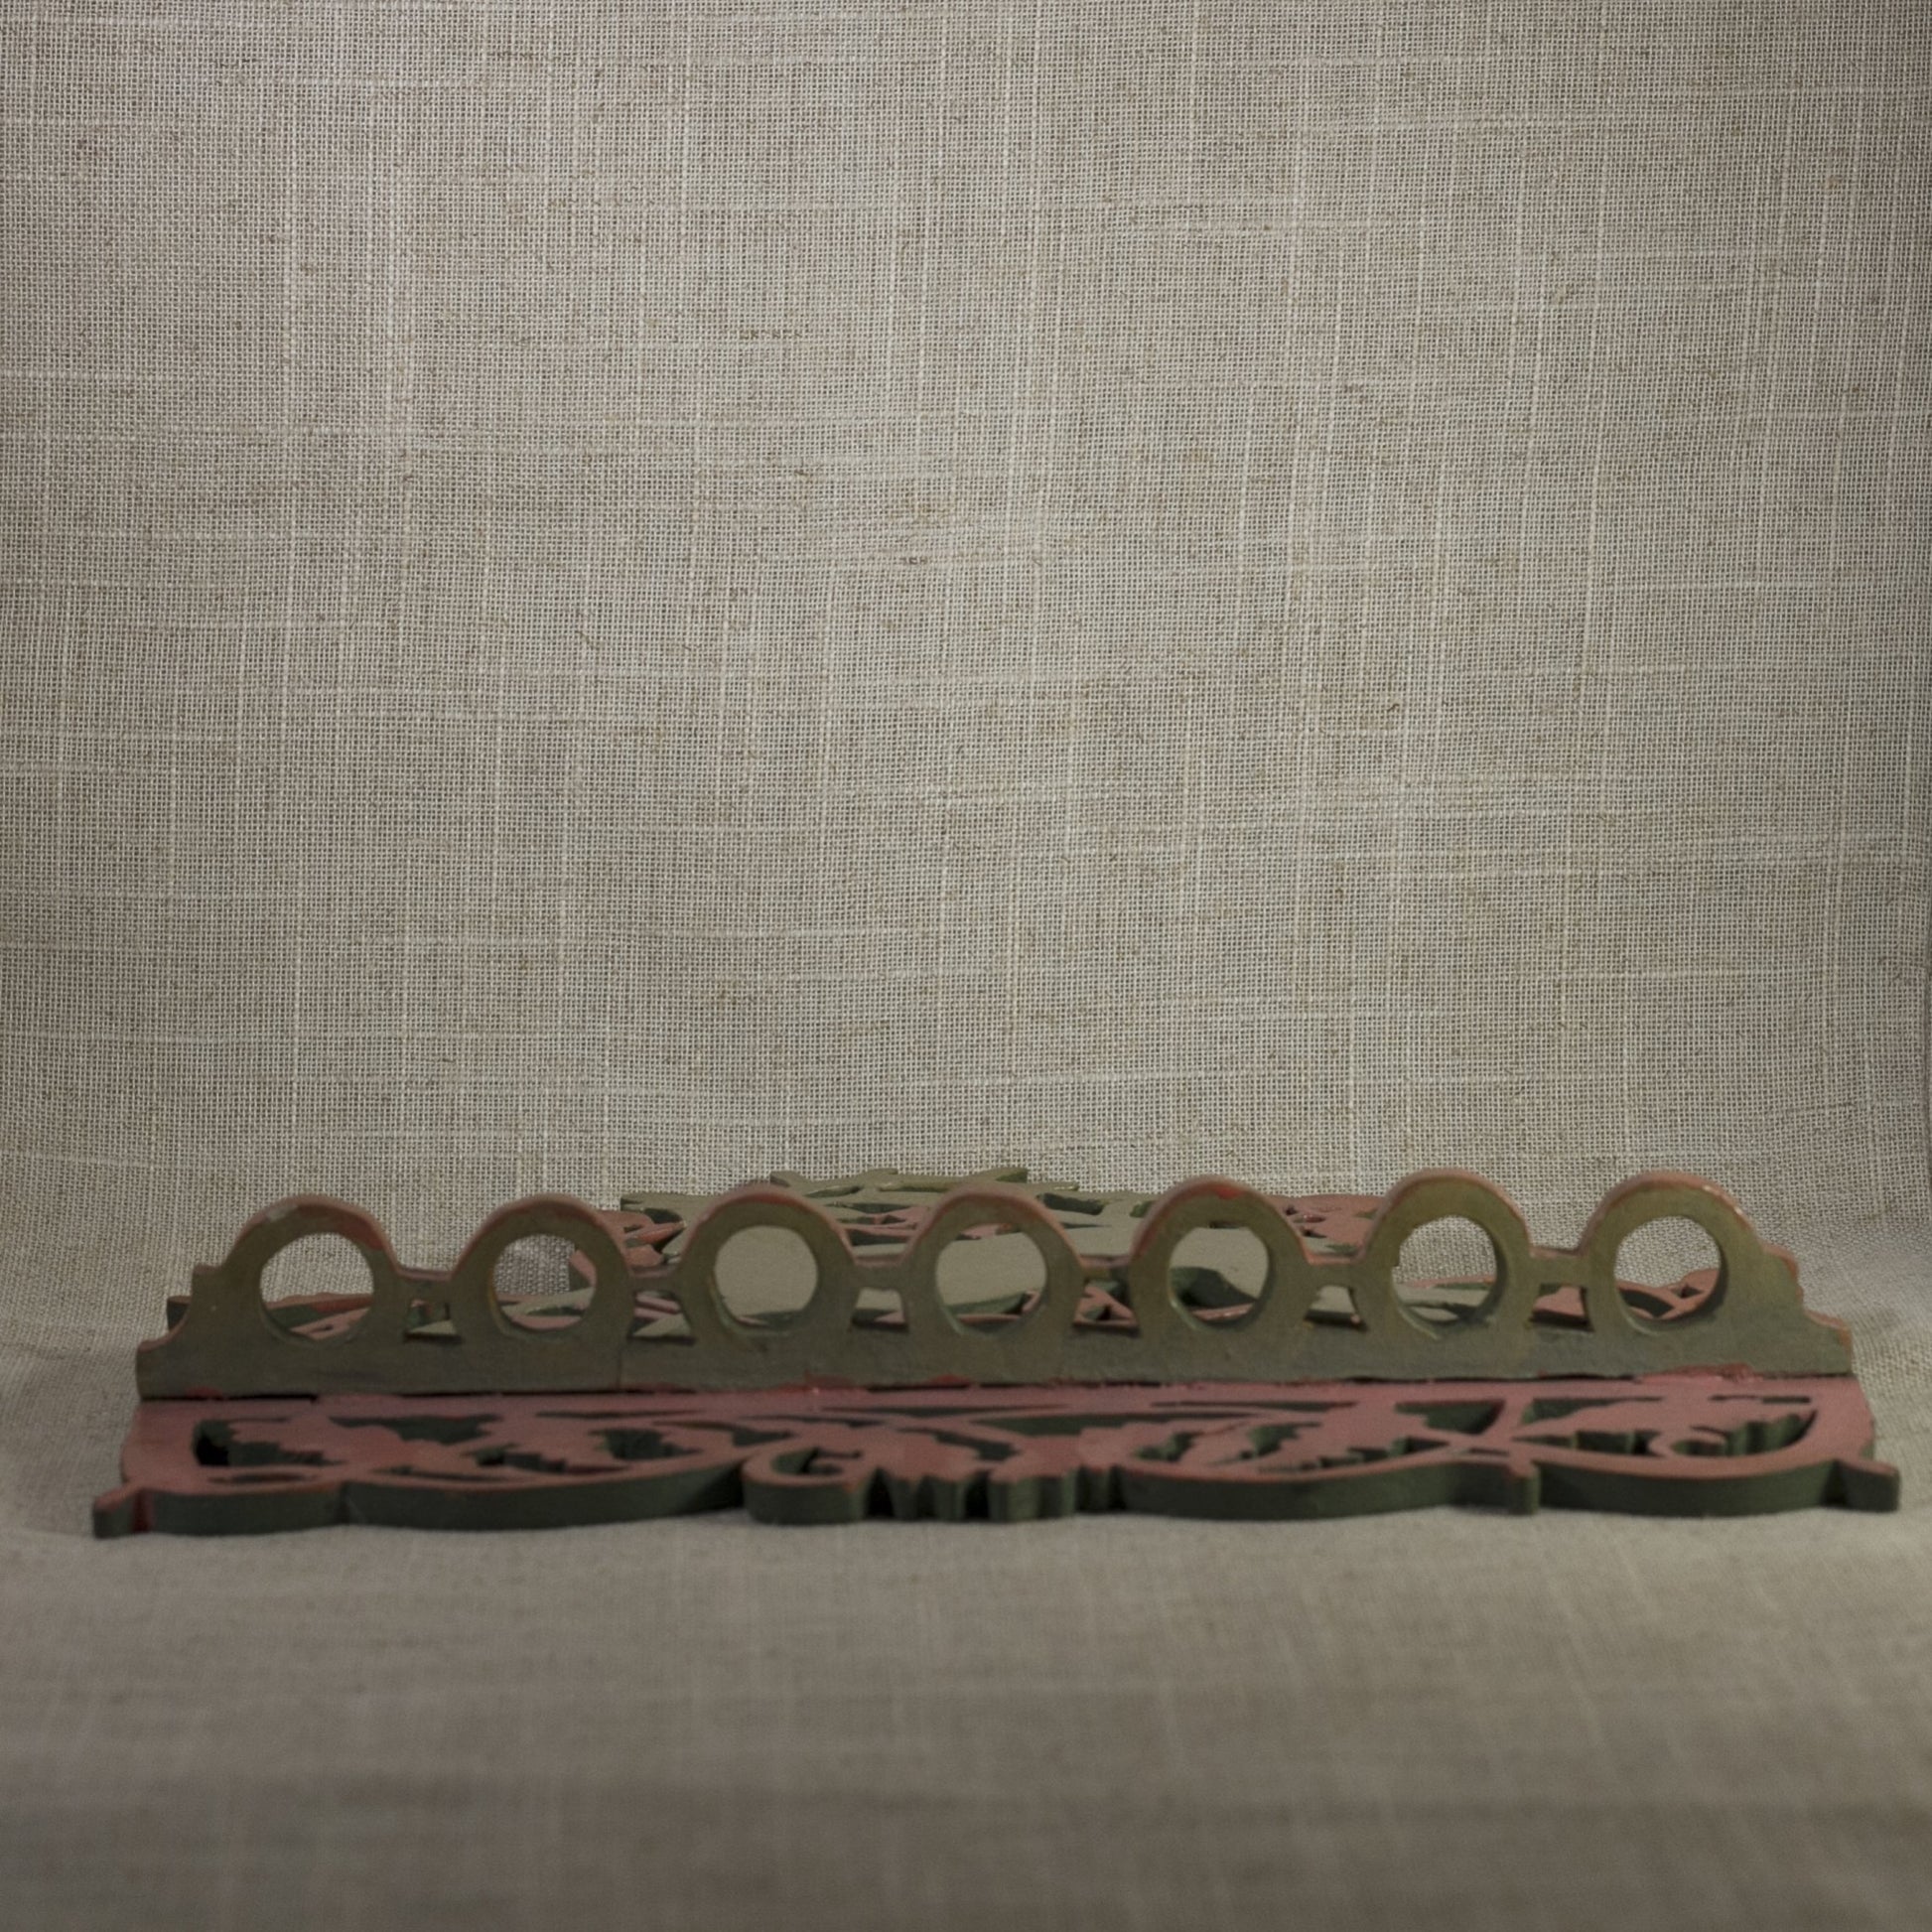 FOLK ART SPOON RACK Scroll and Fretwork Design with Stag